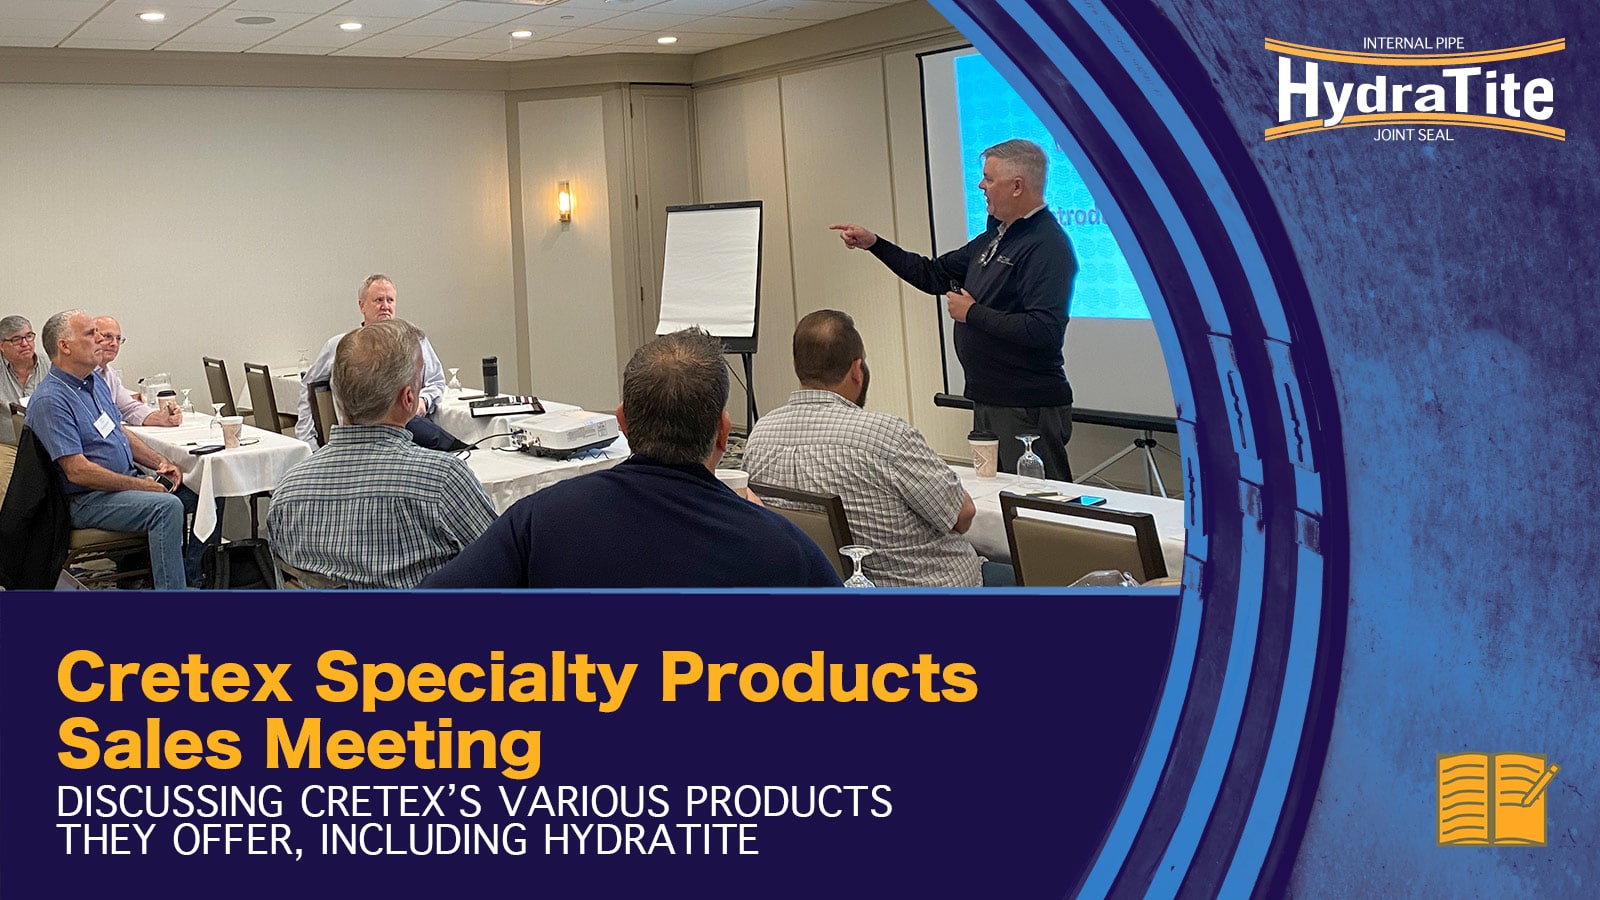 conference discussing products installed by Cretex such as HydraTite, 'Cretex Speciality Products Sales Meeting, Discuss Cretex's Various Products They Offer, Including HydraTite'